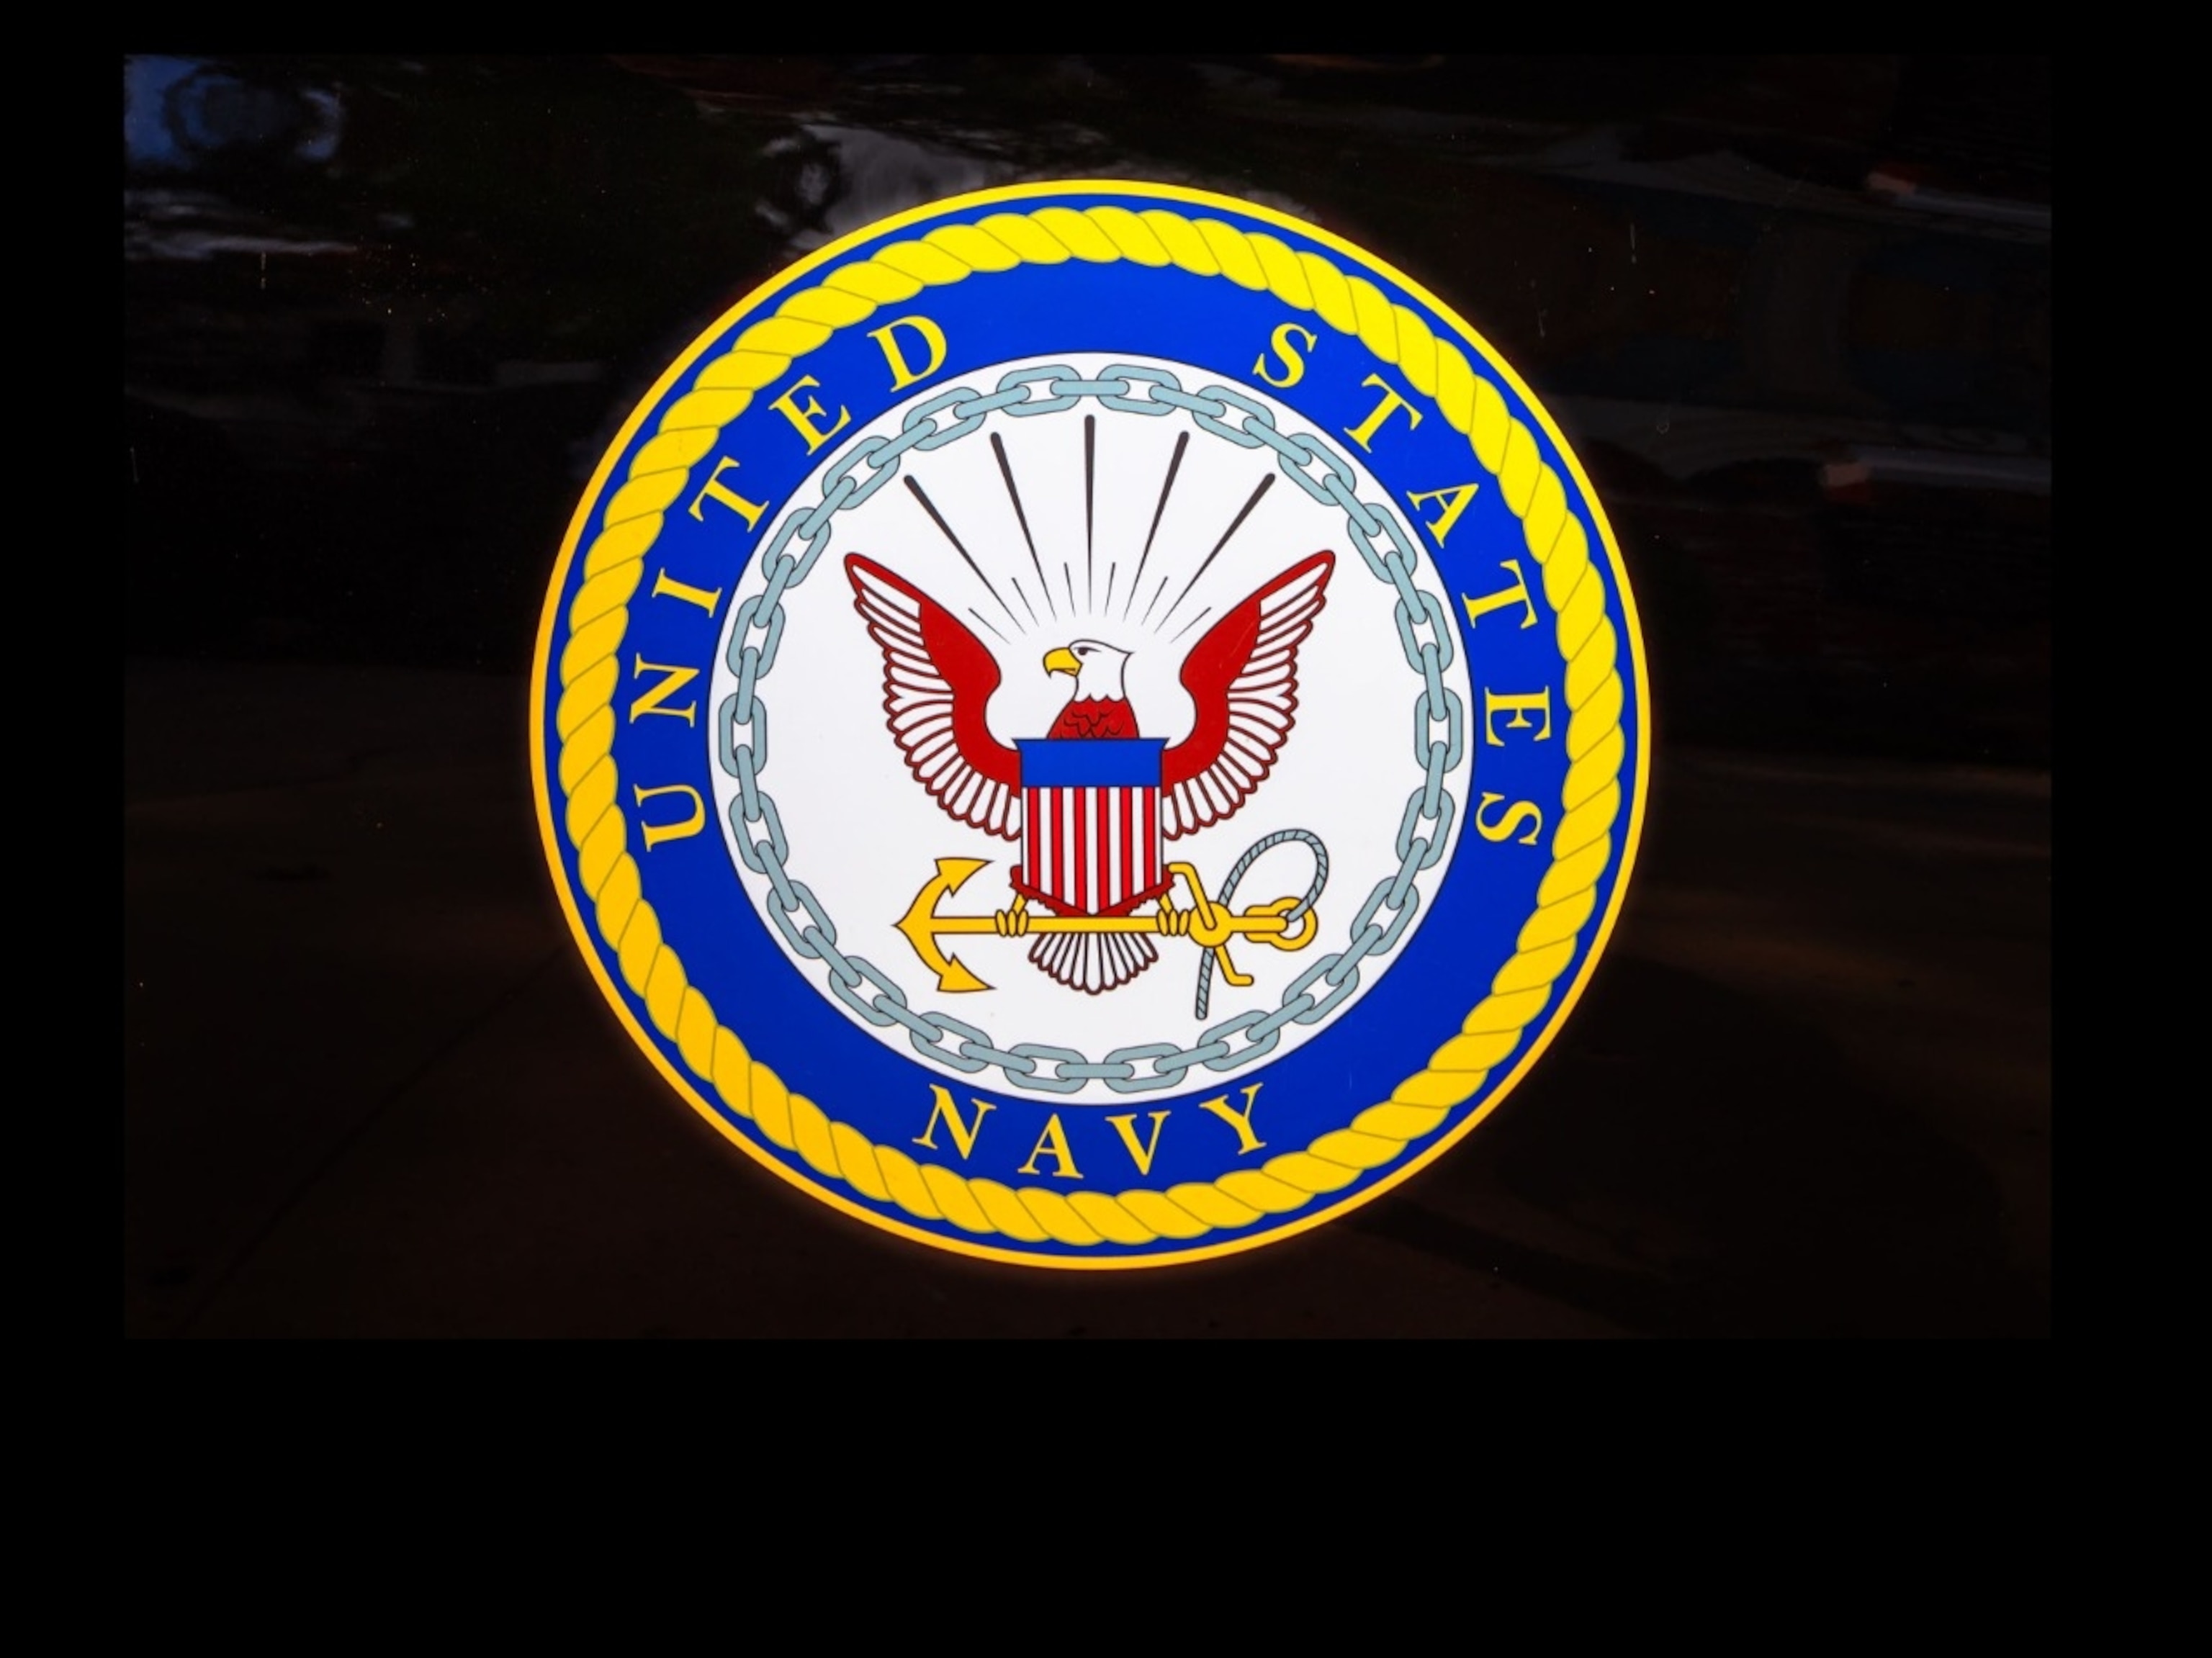 PHOTO: San Diego, Navy pier, California, UNITED STATES - August 3, 2018: Emblem of the United States Navy isolated on a door of black car of United States Armed Forces.